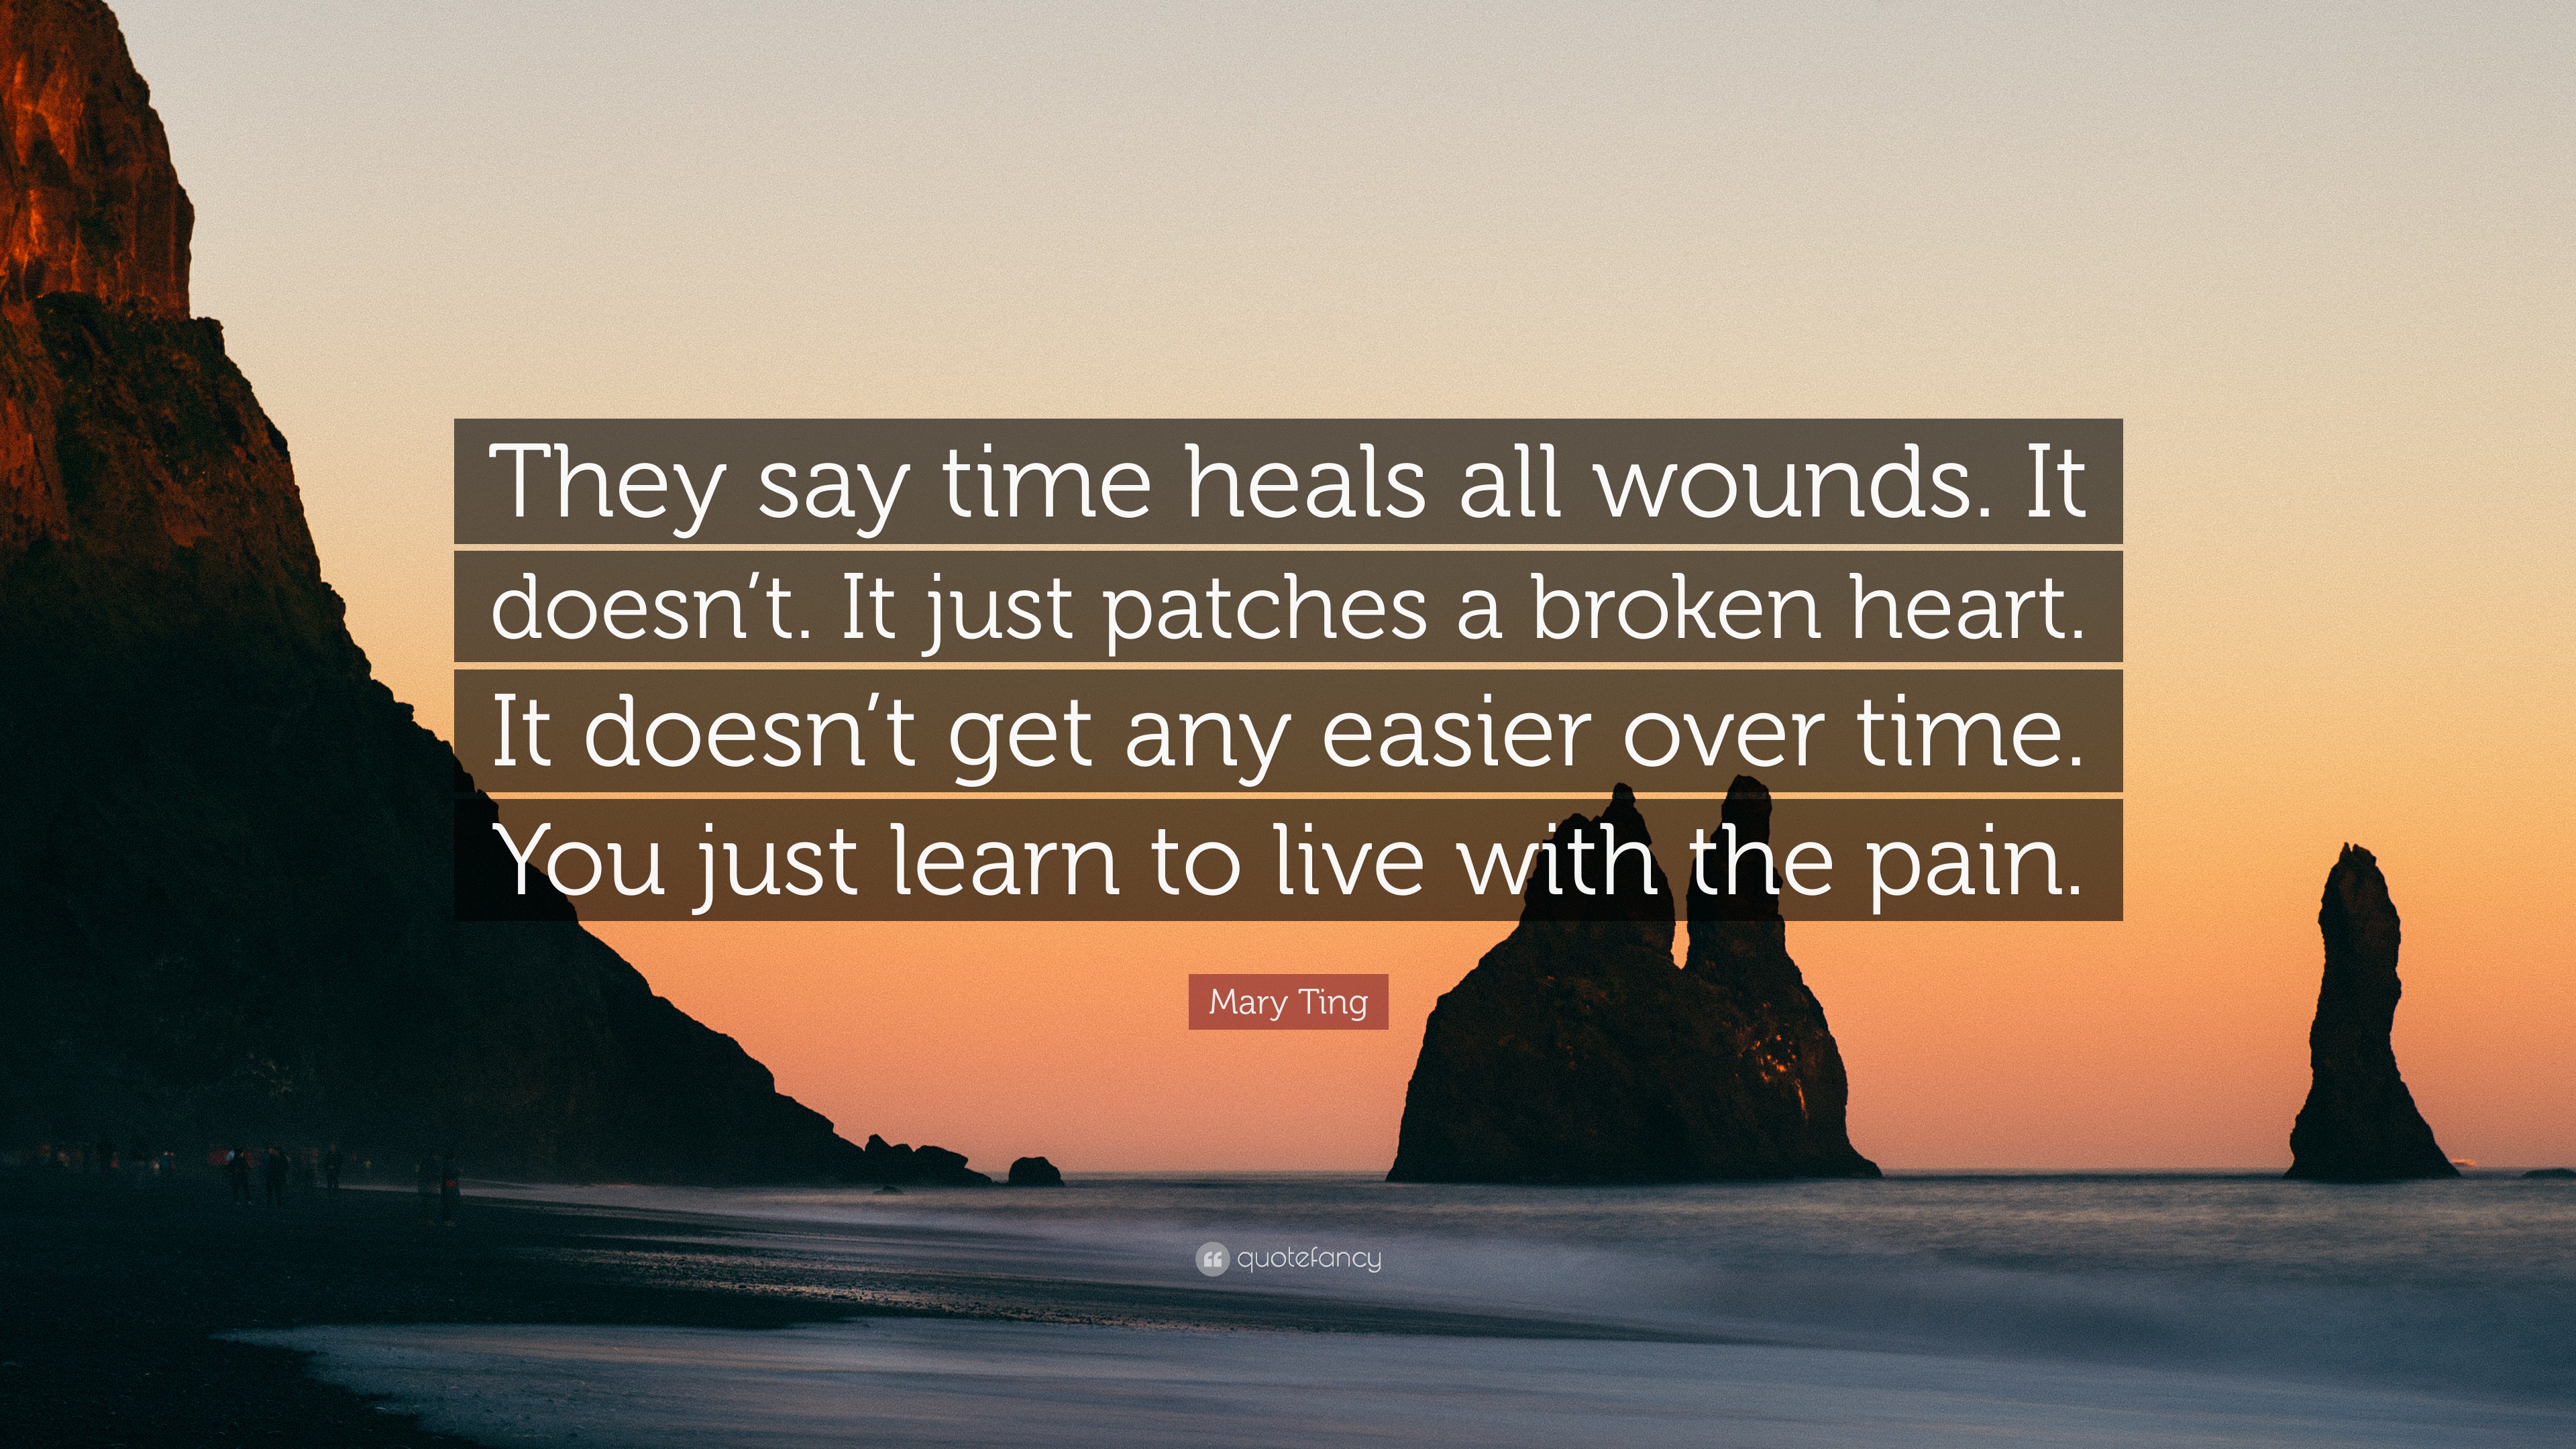 Time Heals all Wounds